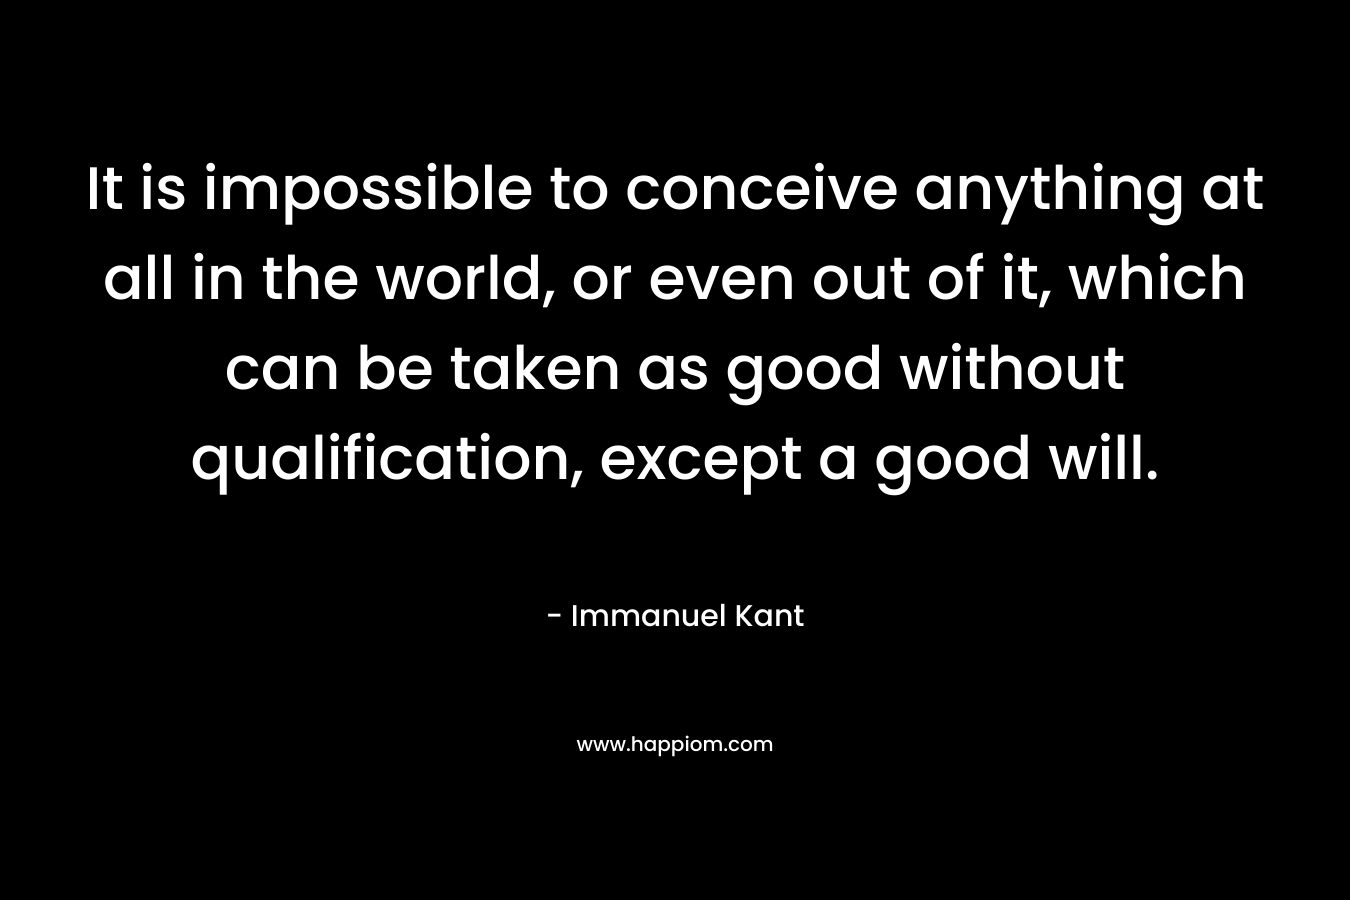 It is impossible to conceive anything at all in the world, or even out of it, which can be taken as good without qualification, except a good will. – Immanuel Kant